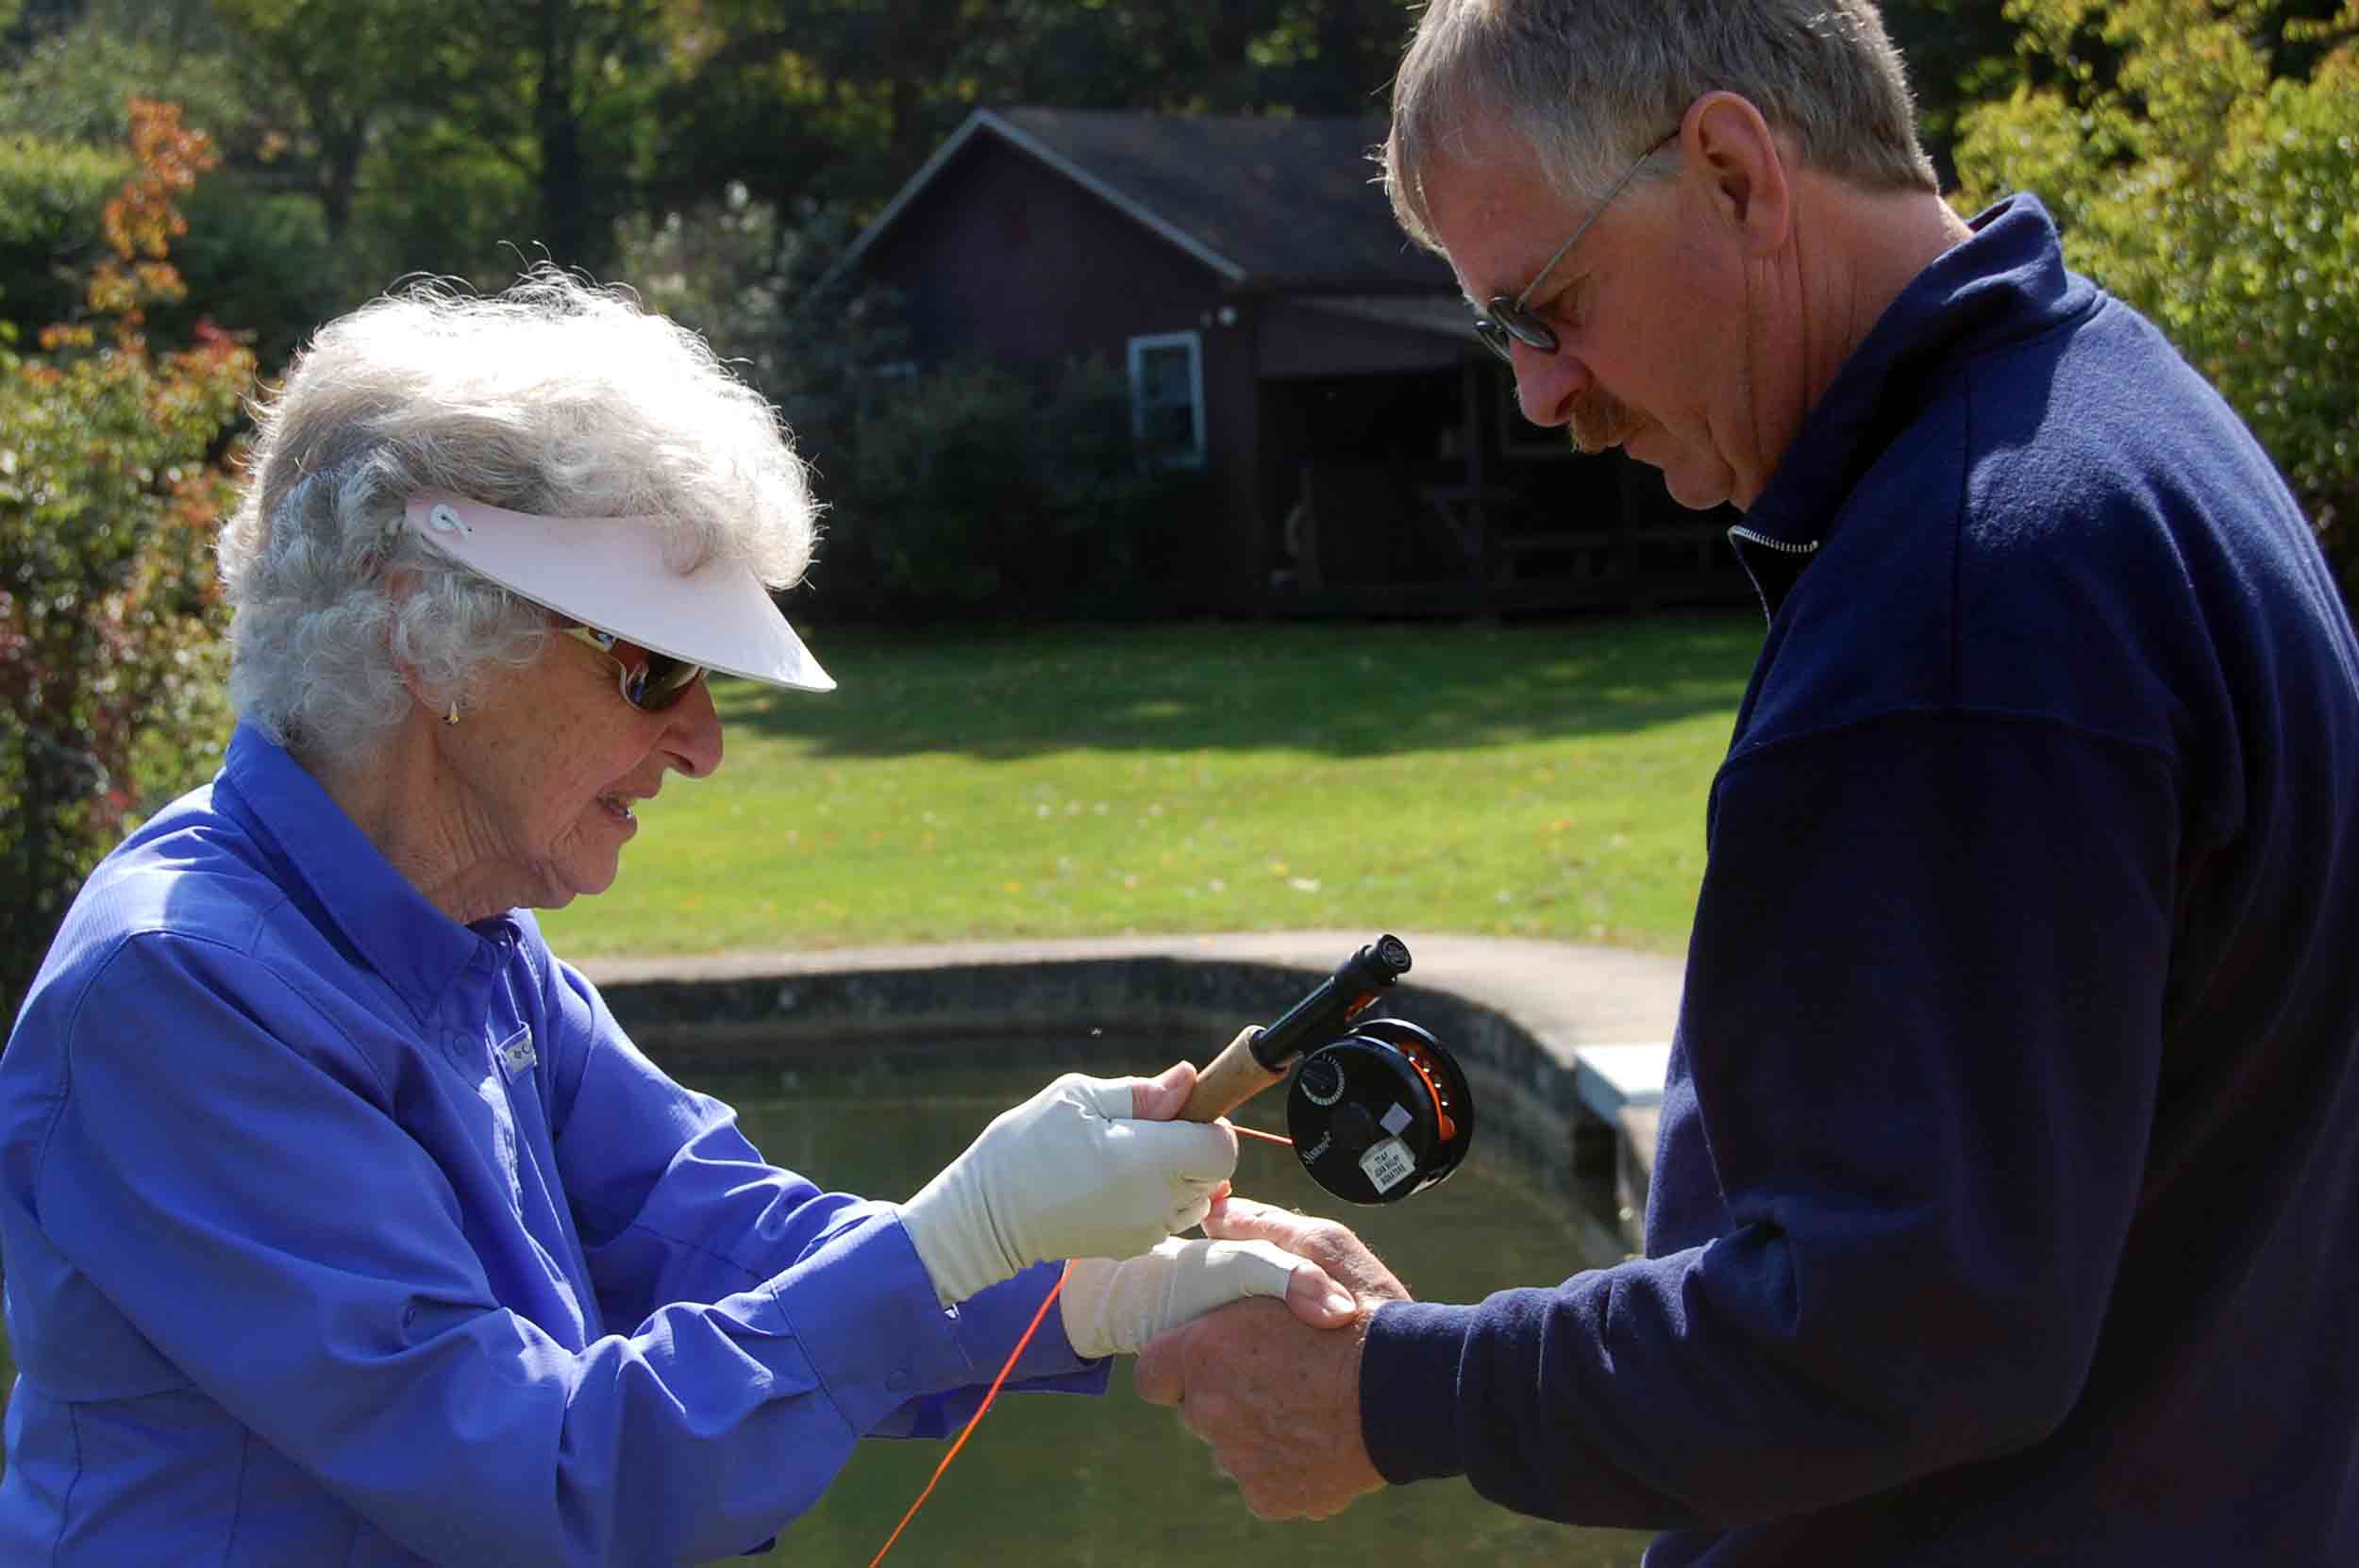 Joan Wulff fly casting with student, photo by Mike Hosier